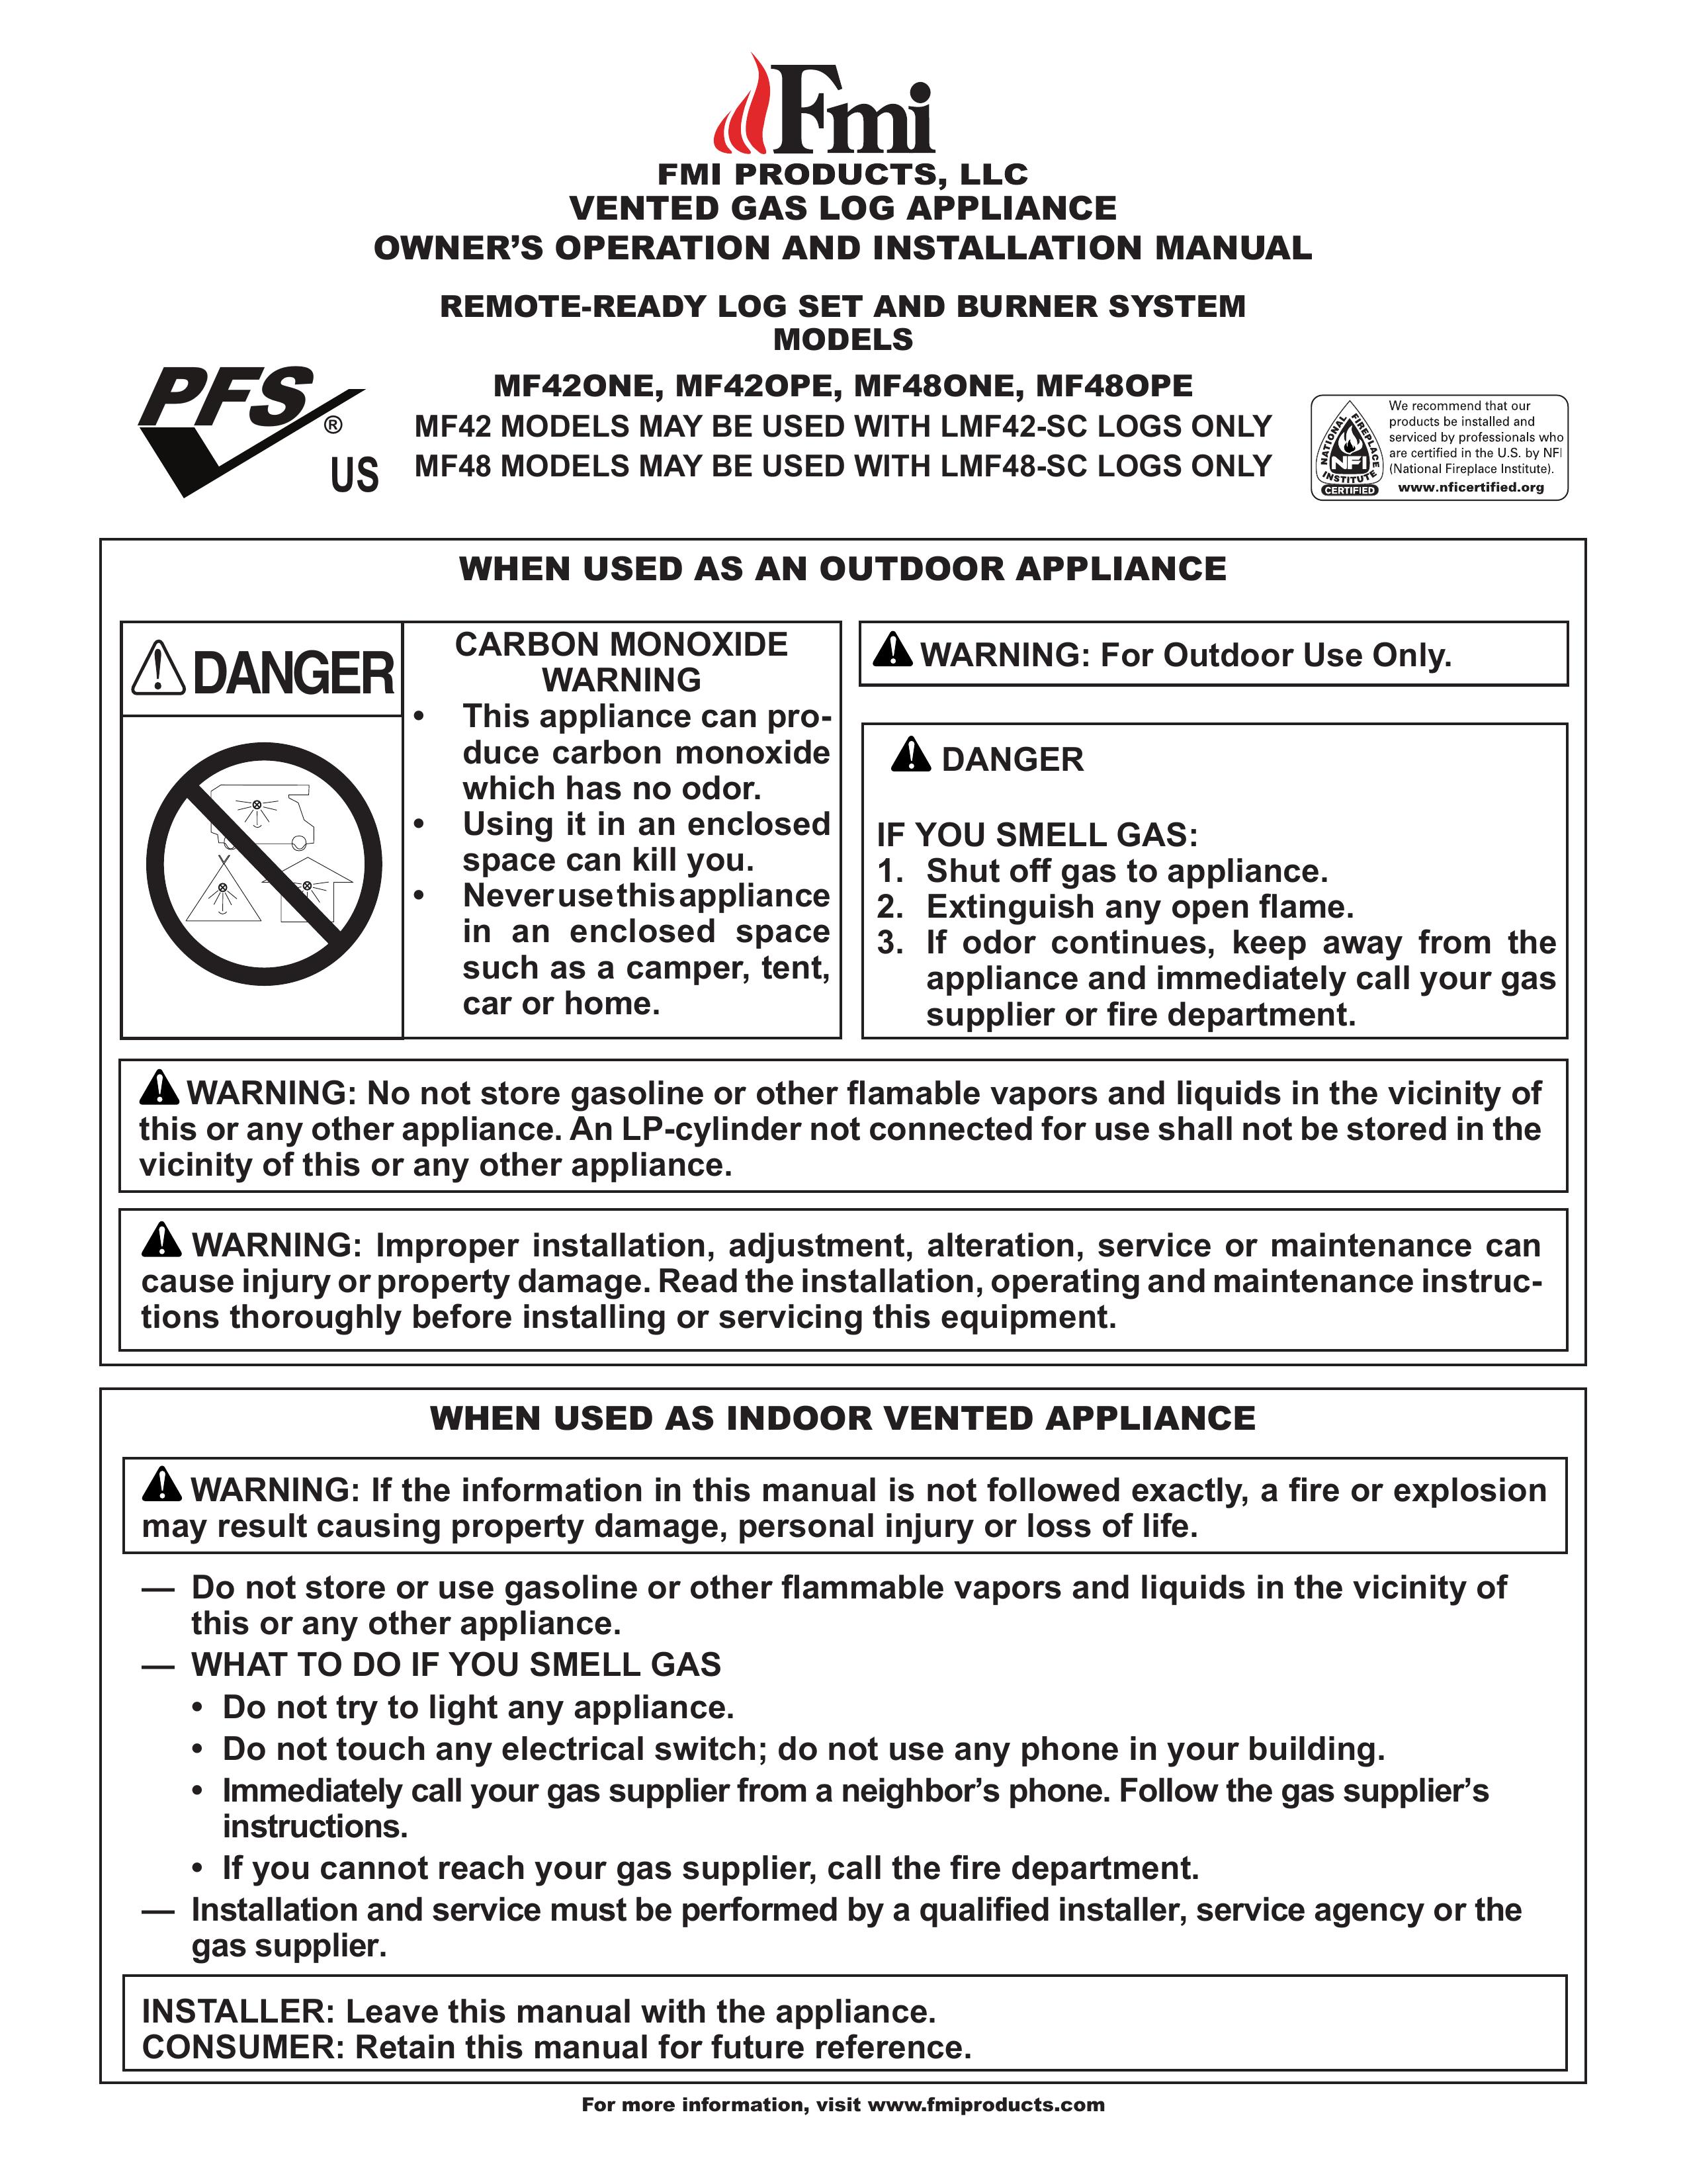 FMI MF42ONE Outdoor Gas Burner User Manual (Page 1)